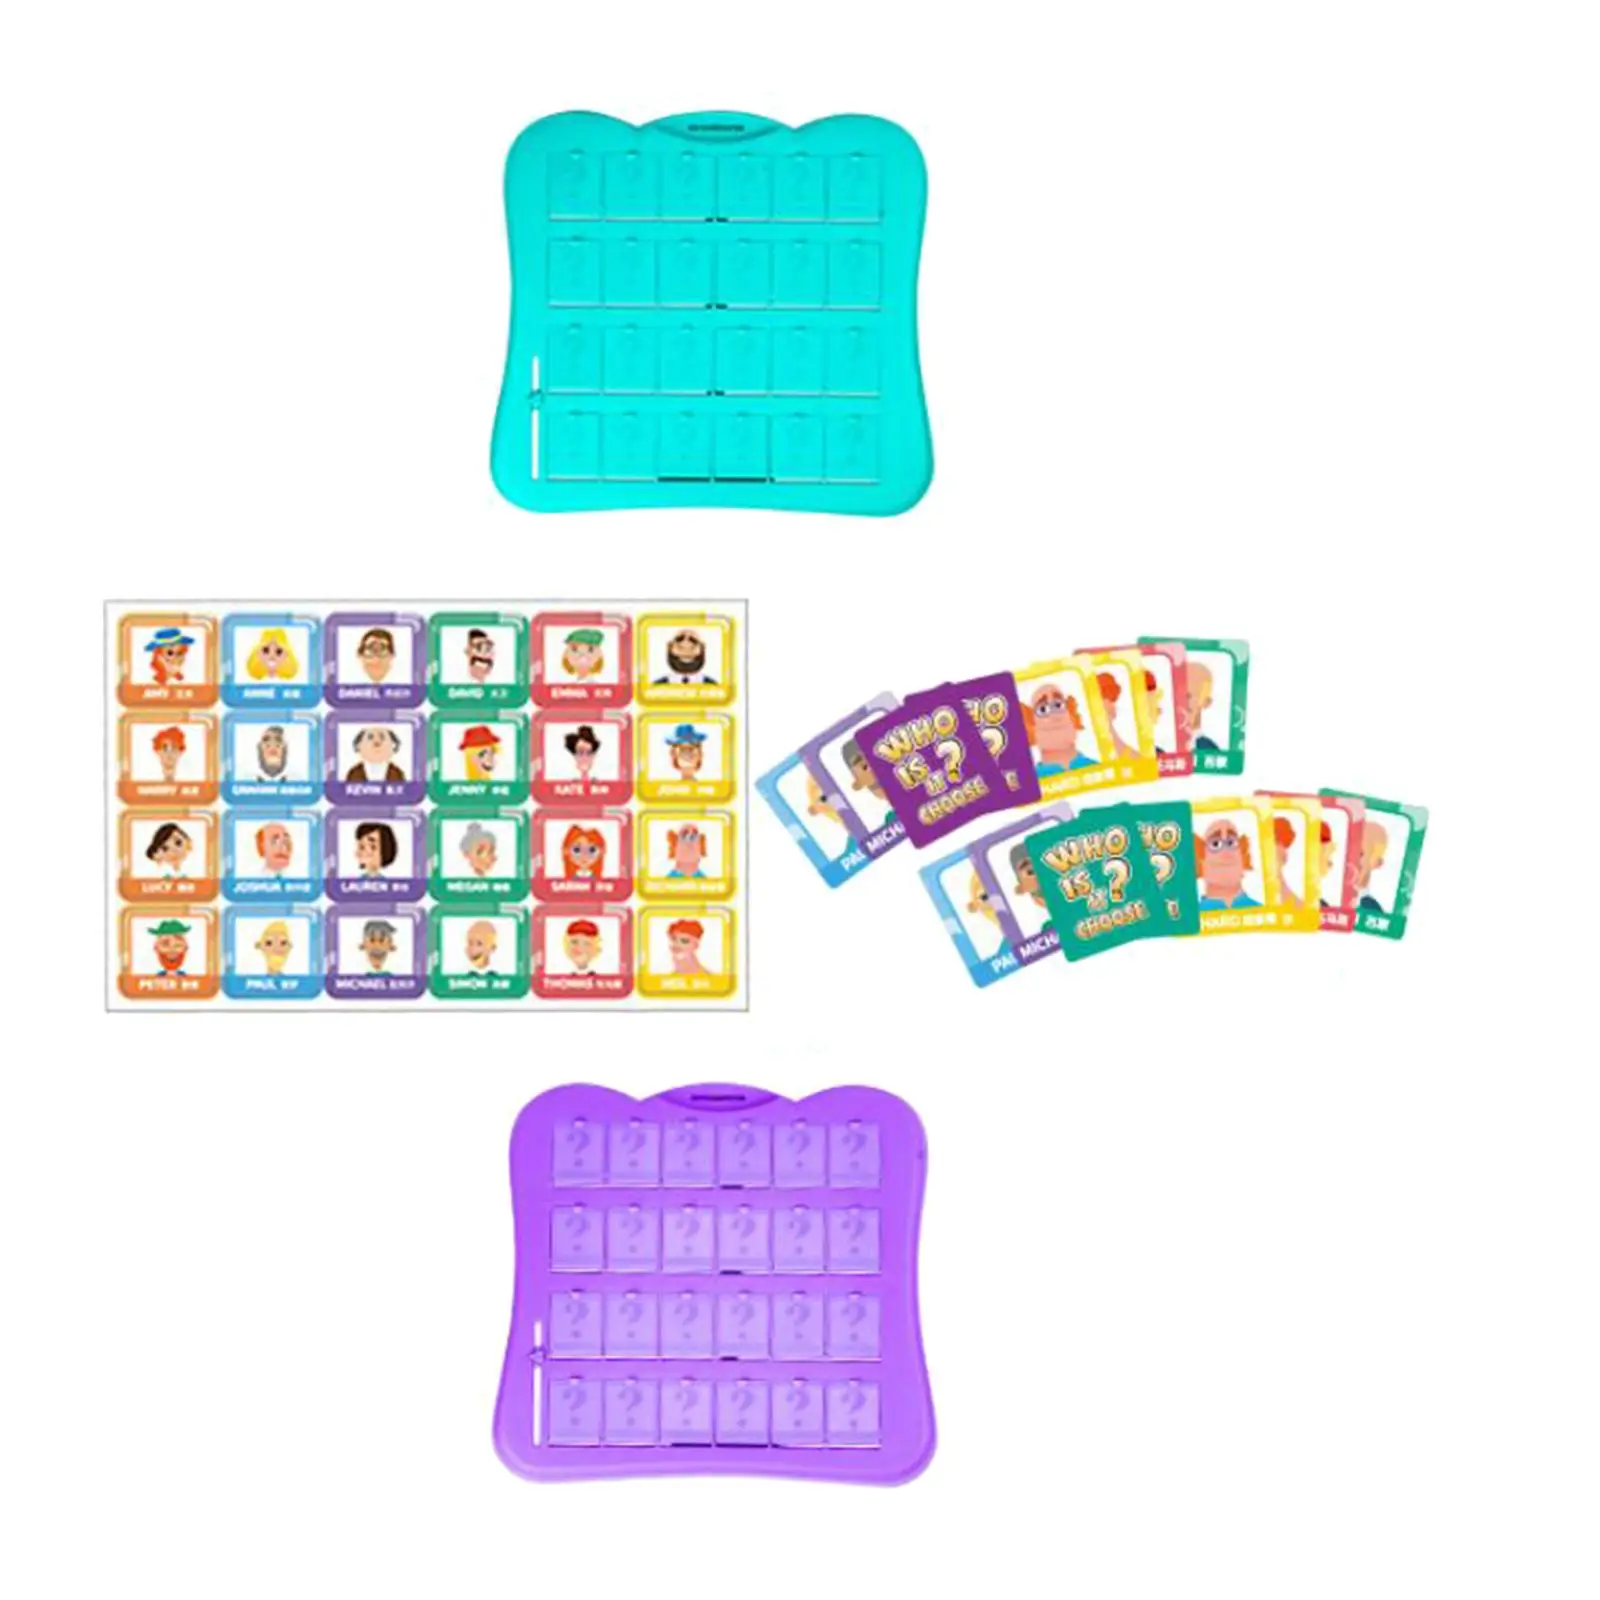 Guessing Who Game Fun Logical Reasoning Abilities Puzzle Game Family Board Game for Children Boys Gifts Travel Games Family Game